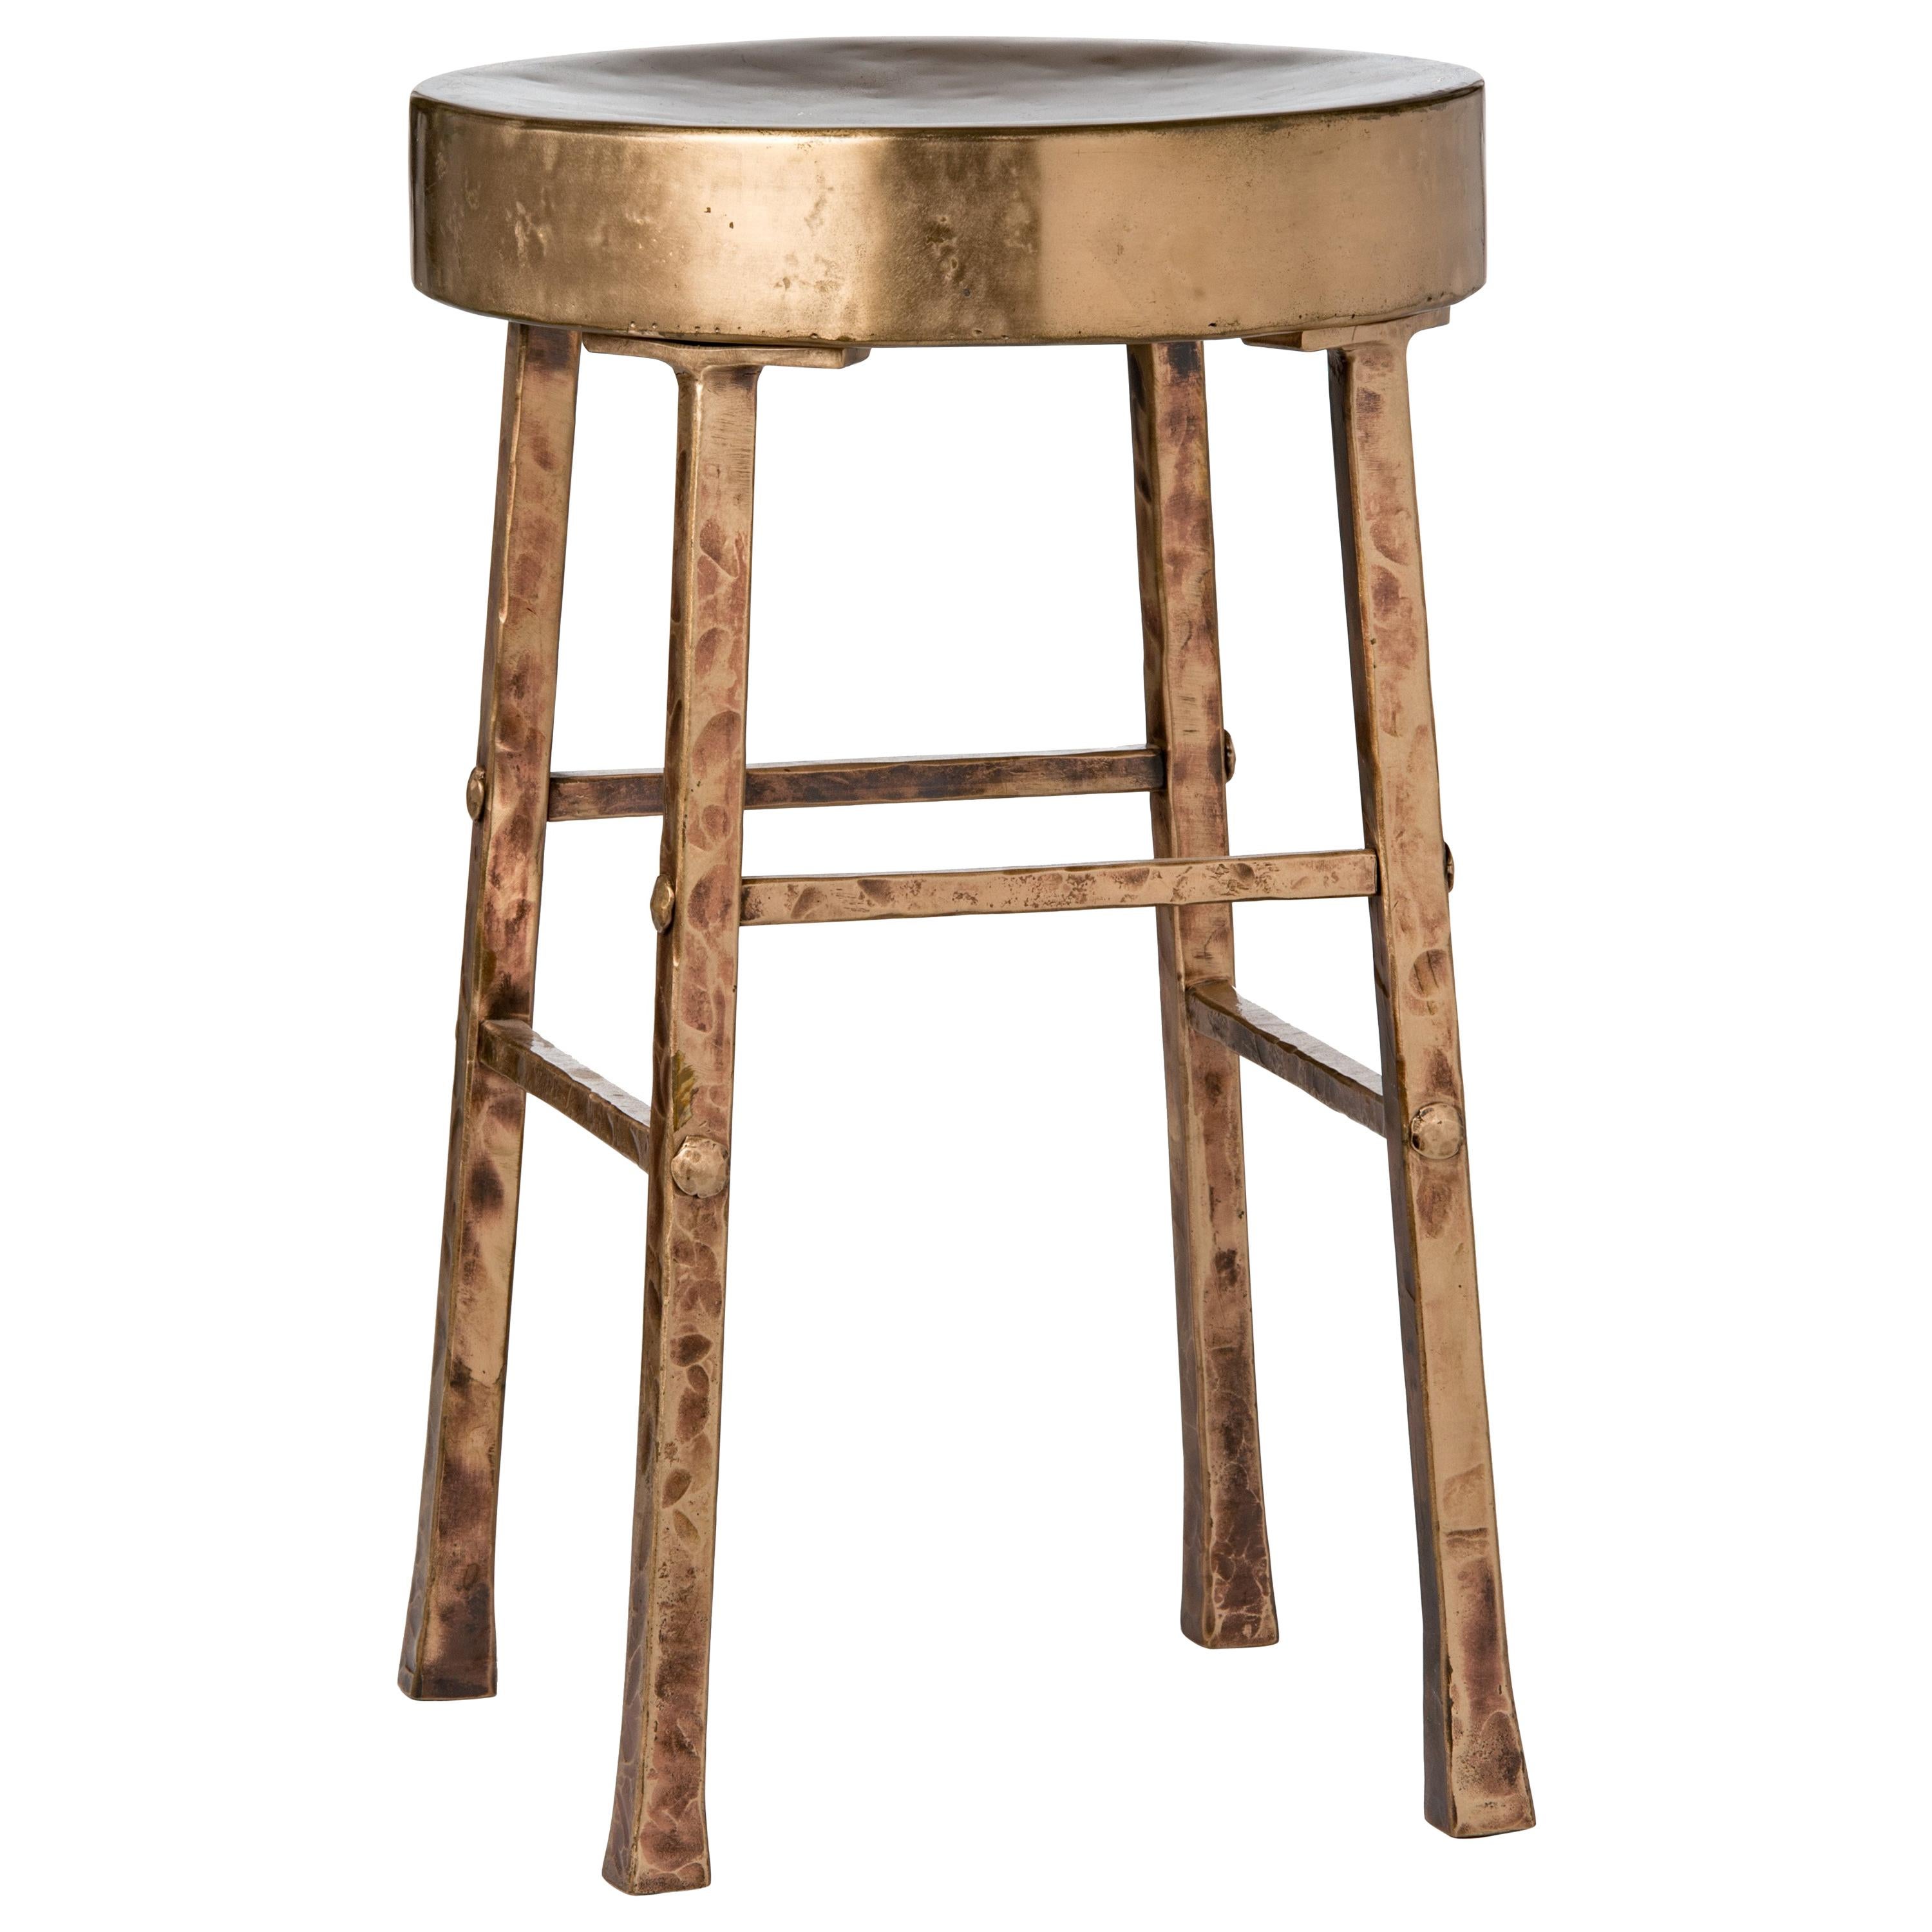 Round Bronze Stool with Forged and Hammered Bronze Legs